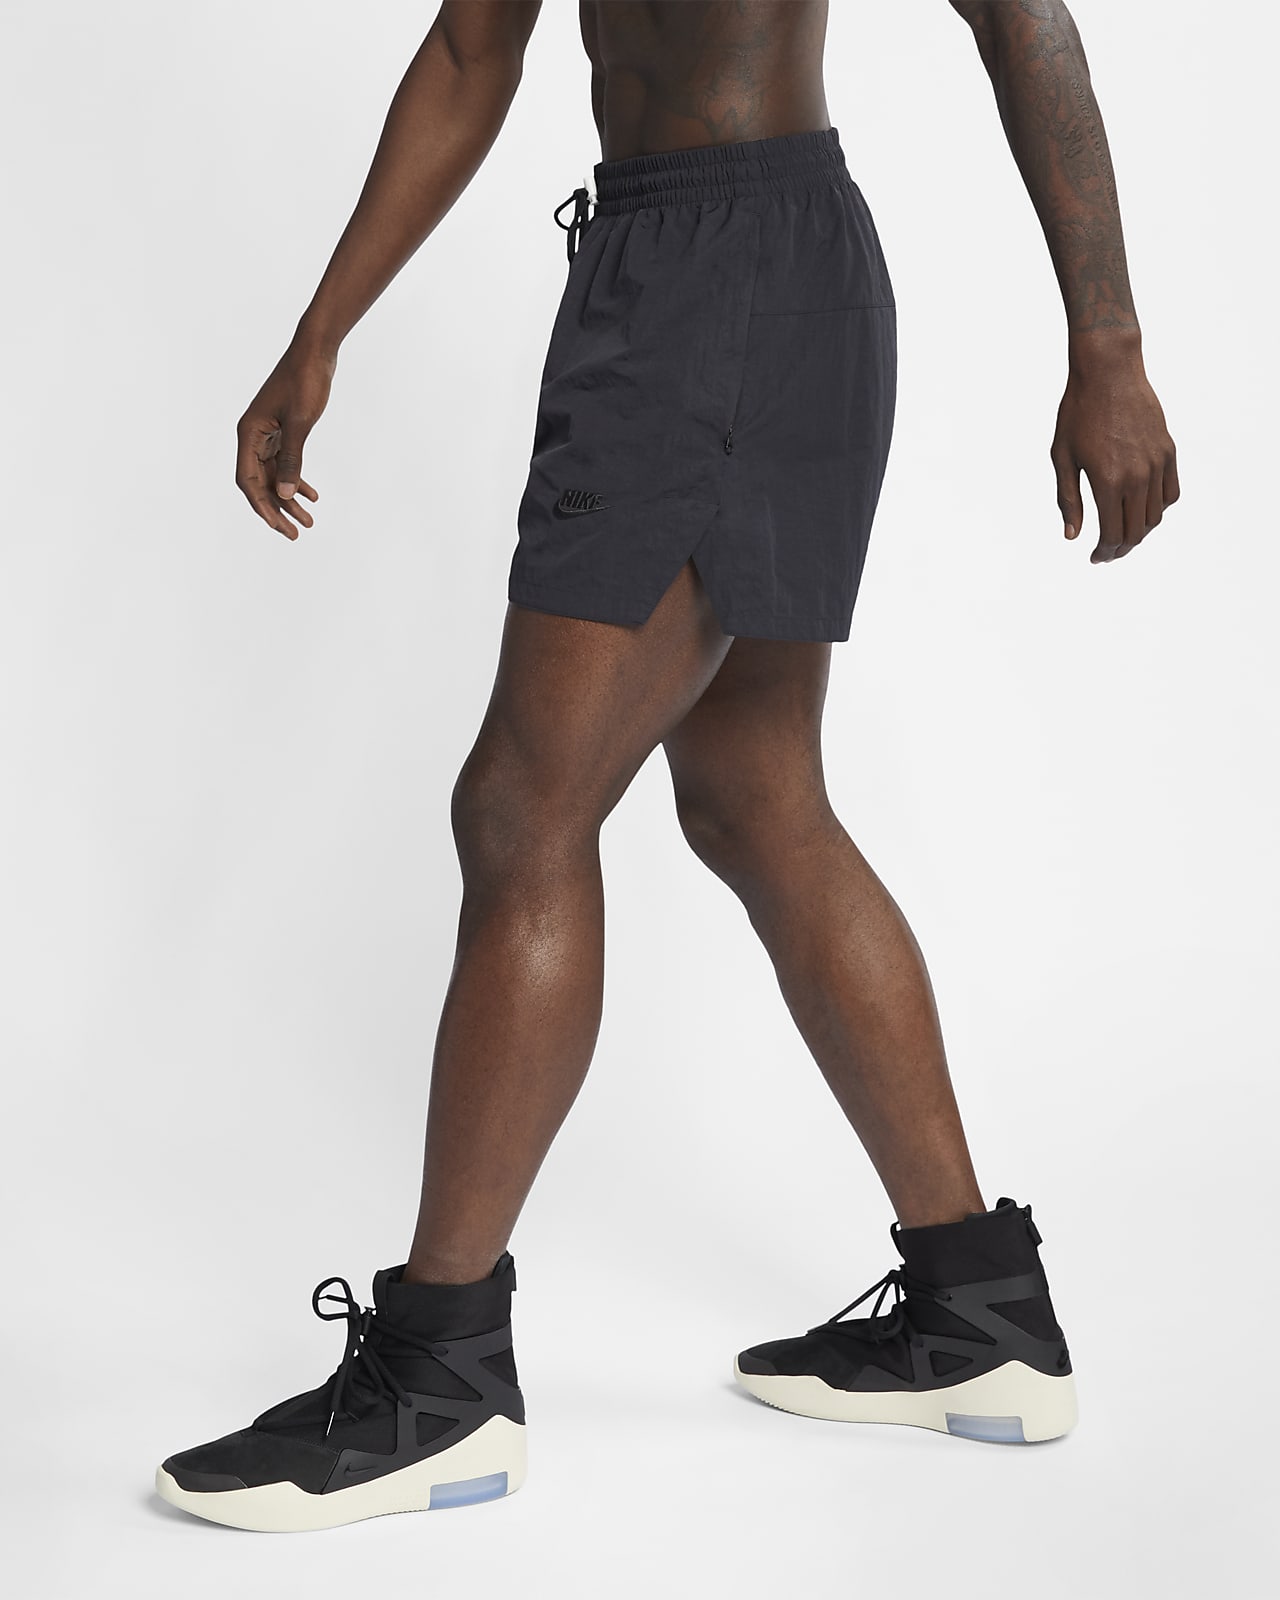 fear of god 1 with shorts